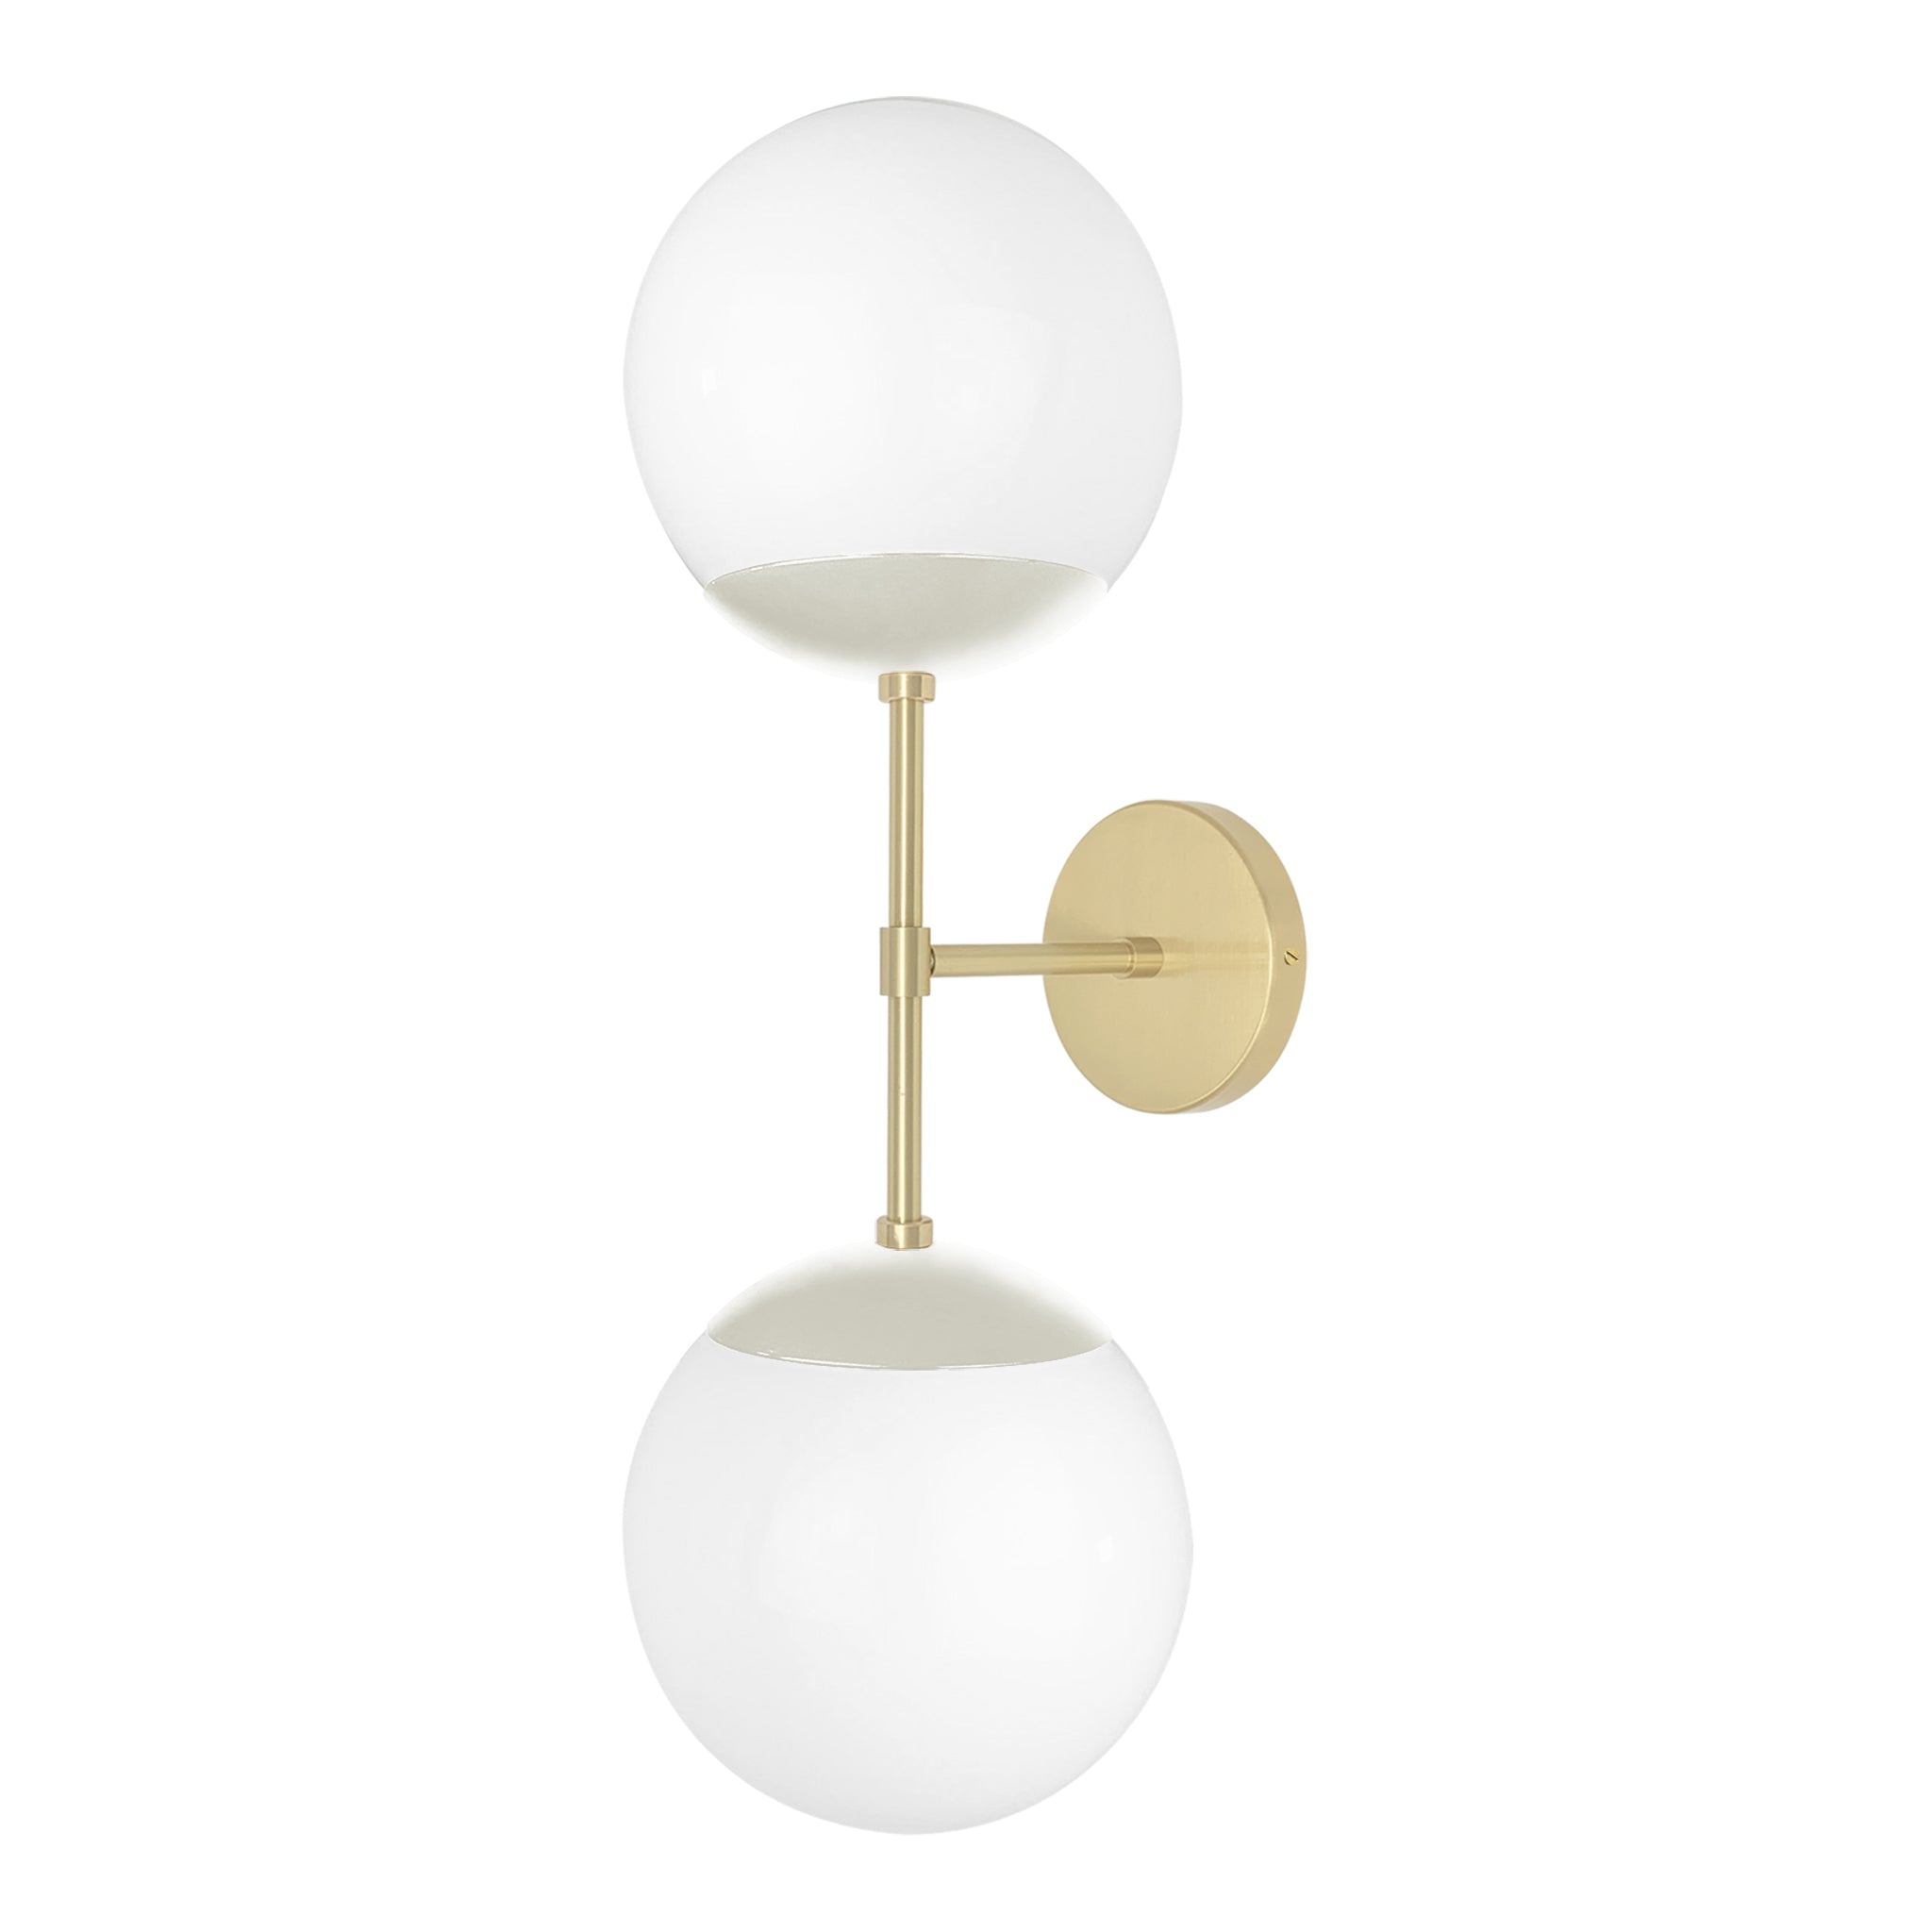 Brass and bone color Cap Double sconce 8" Dutton Brown lighting